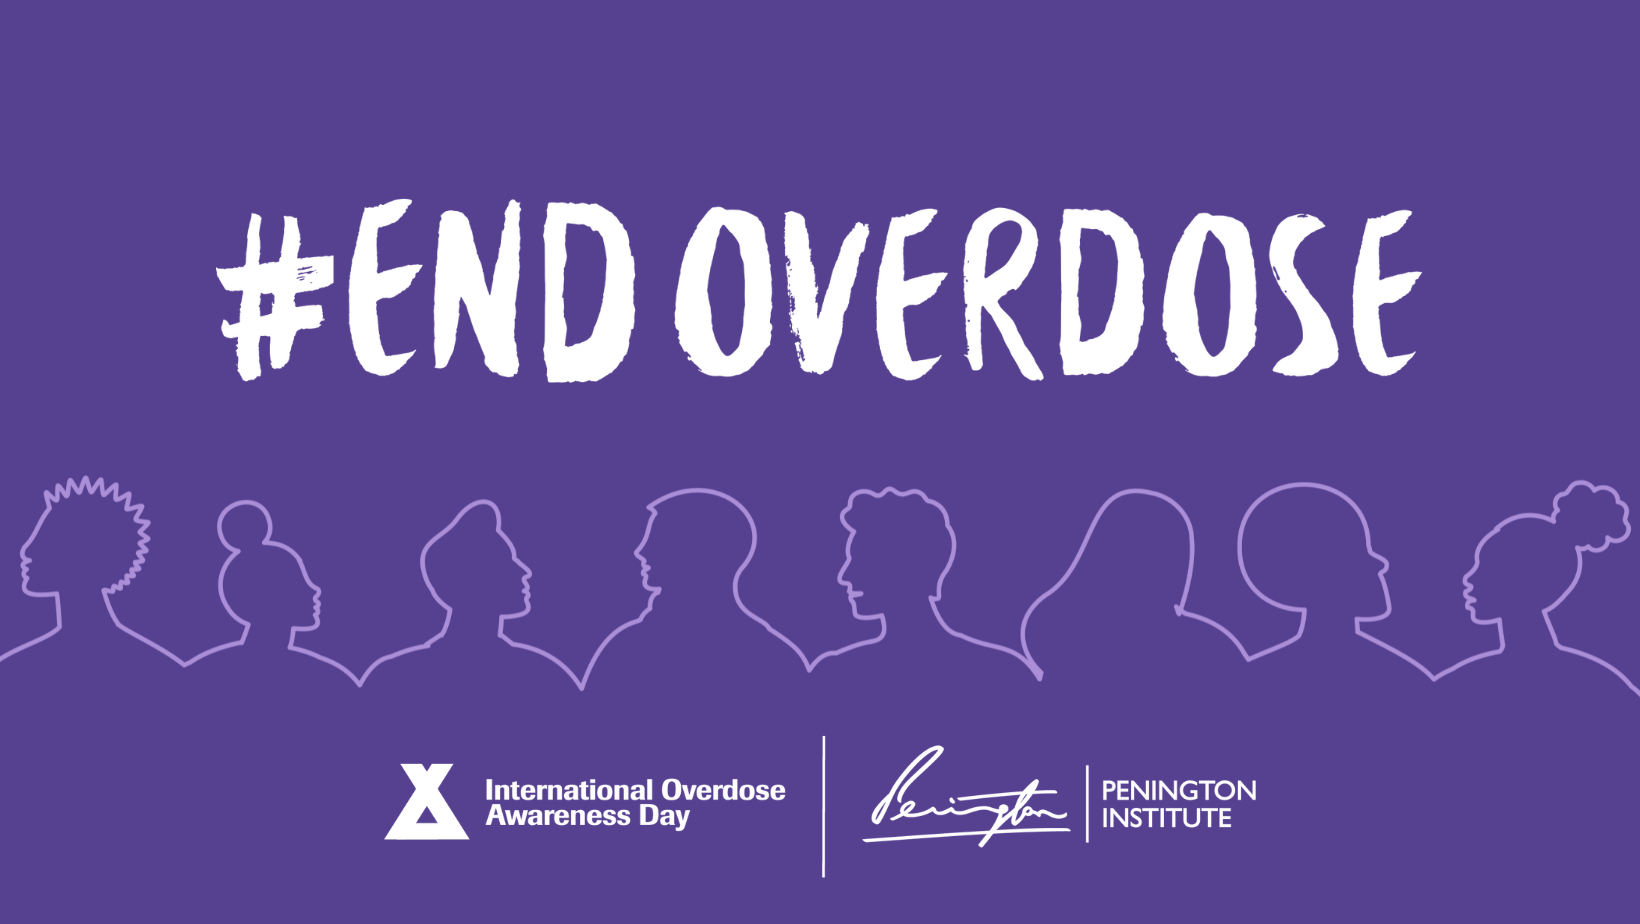 A purple image with white text that says #EndOverdose